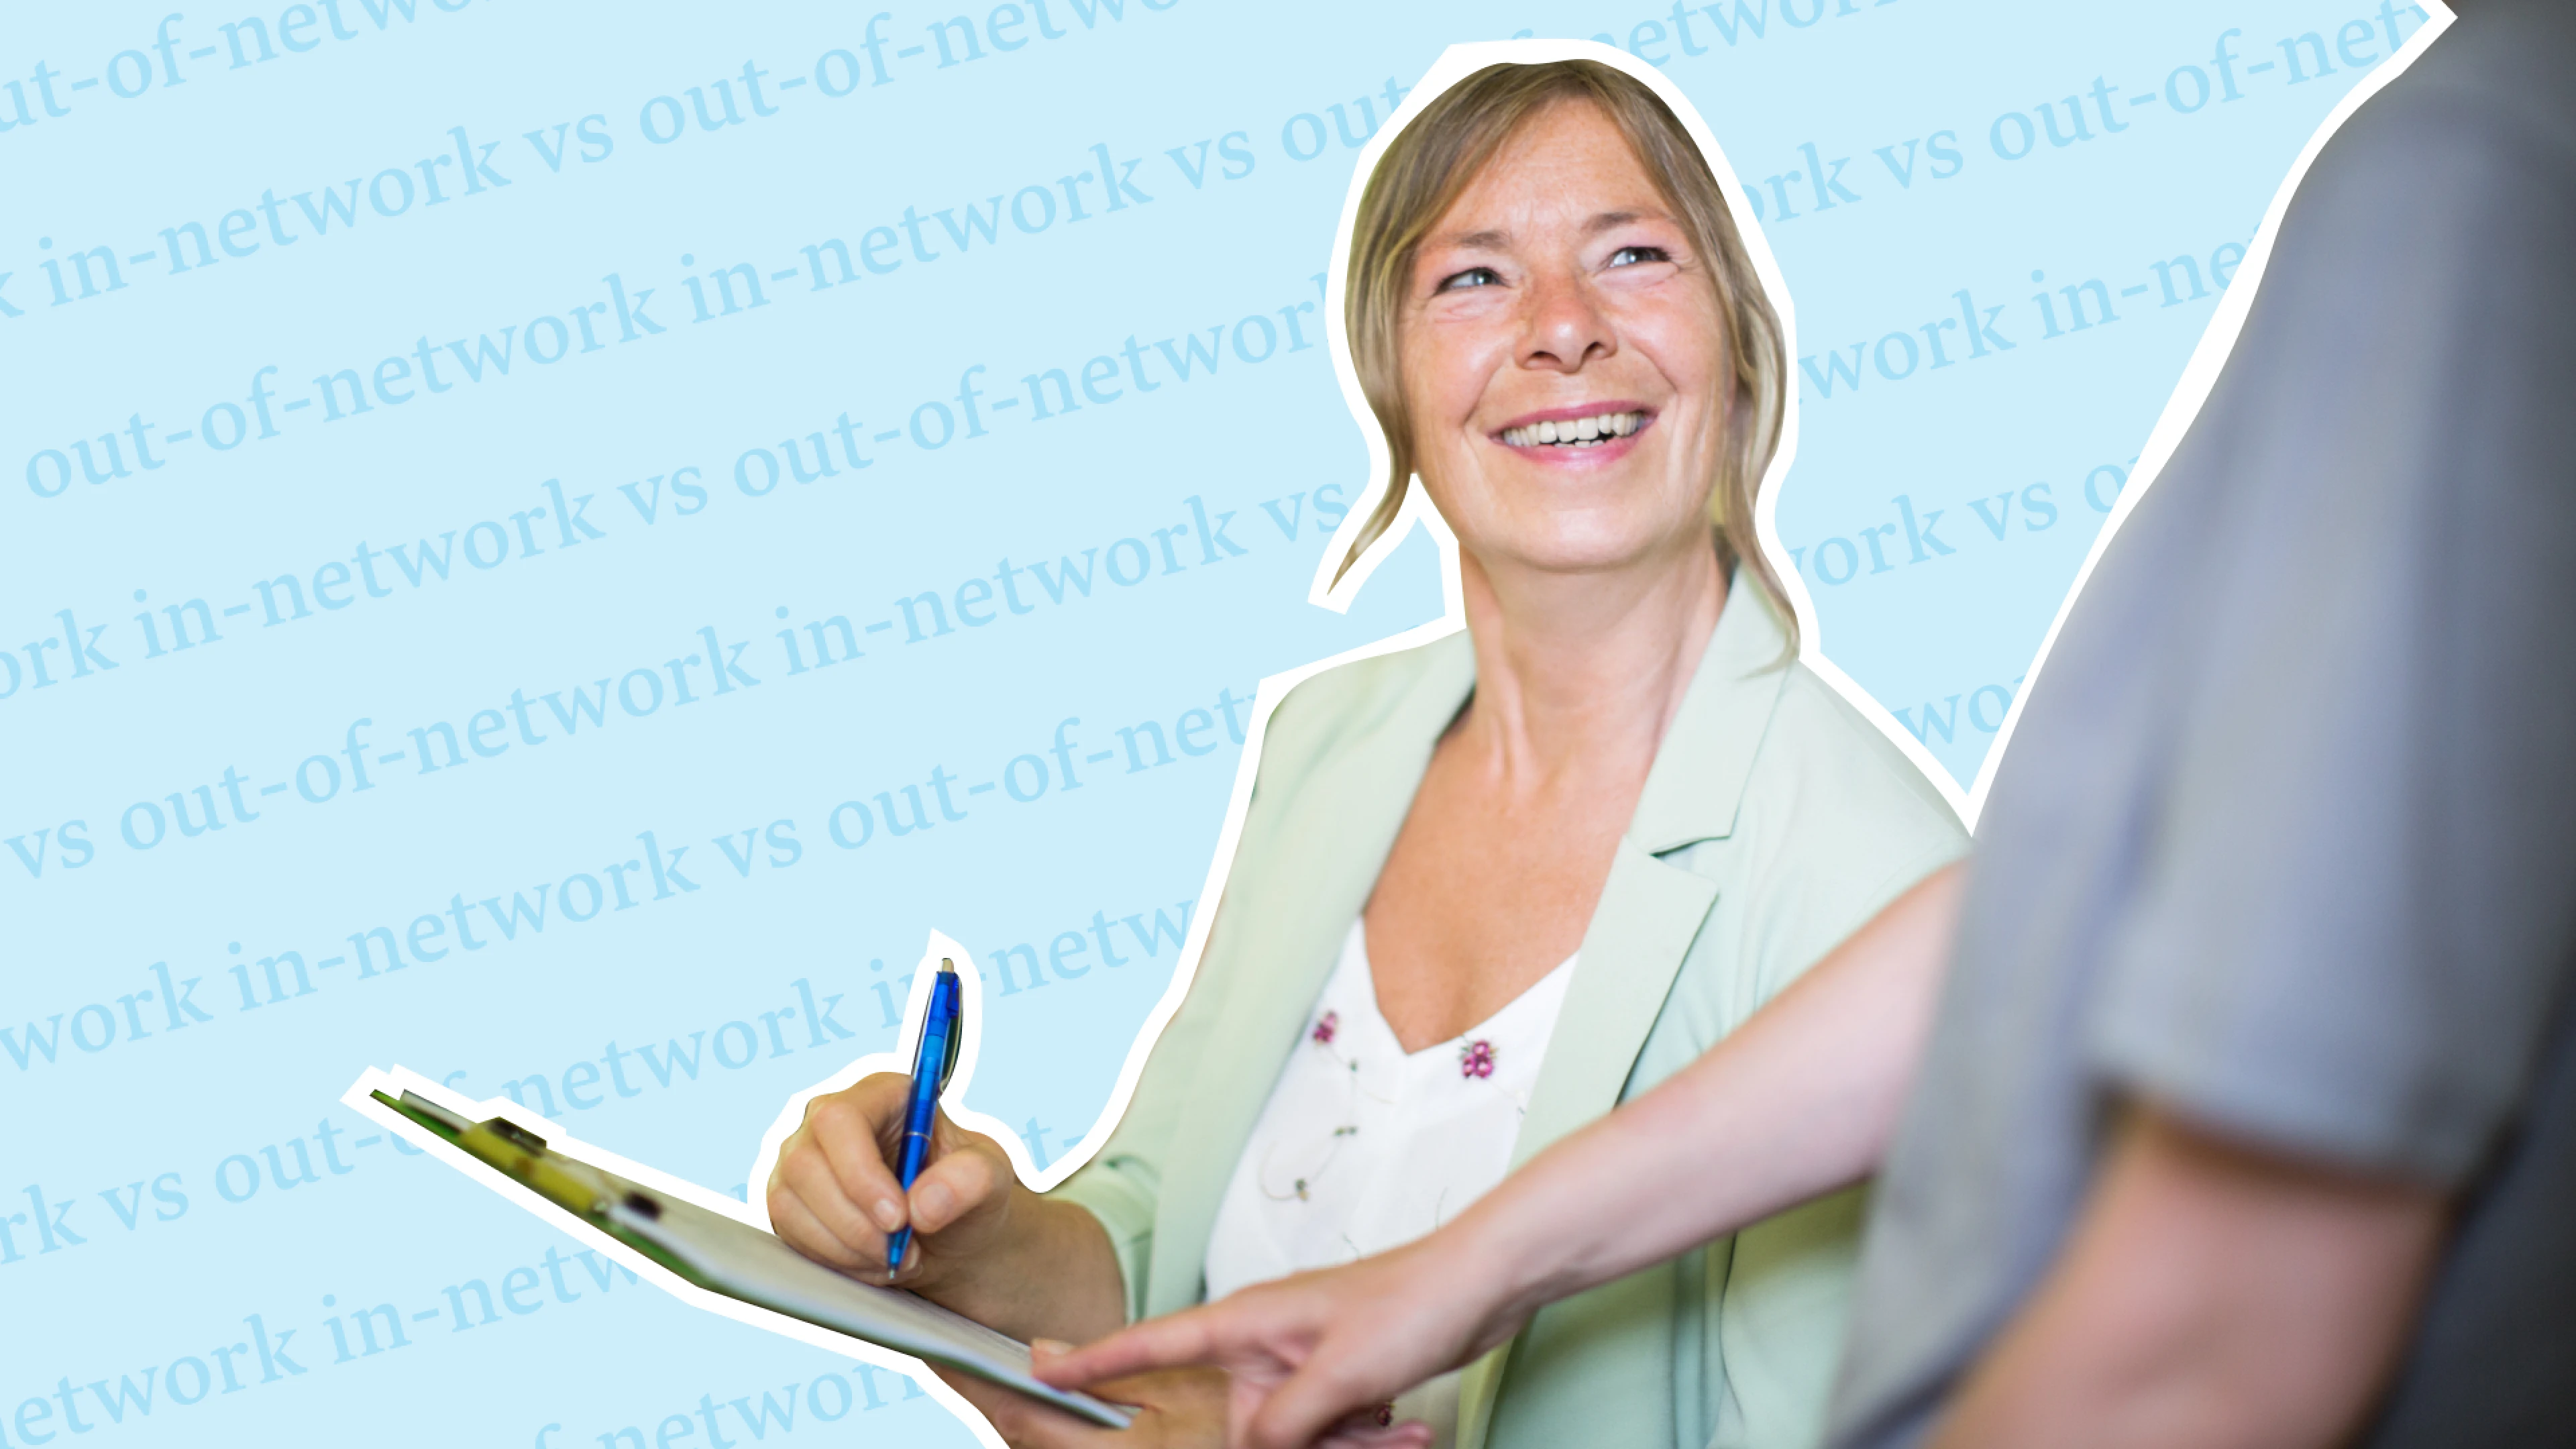 Blog - Hero - In-Network vs. Out-of-Network Healthcare Providers: What’s the Difference?